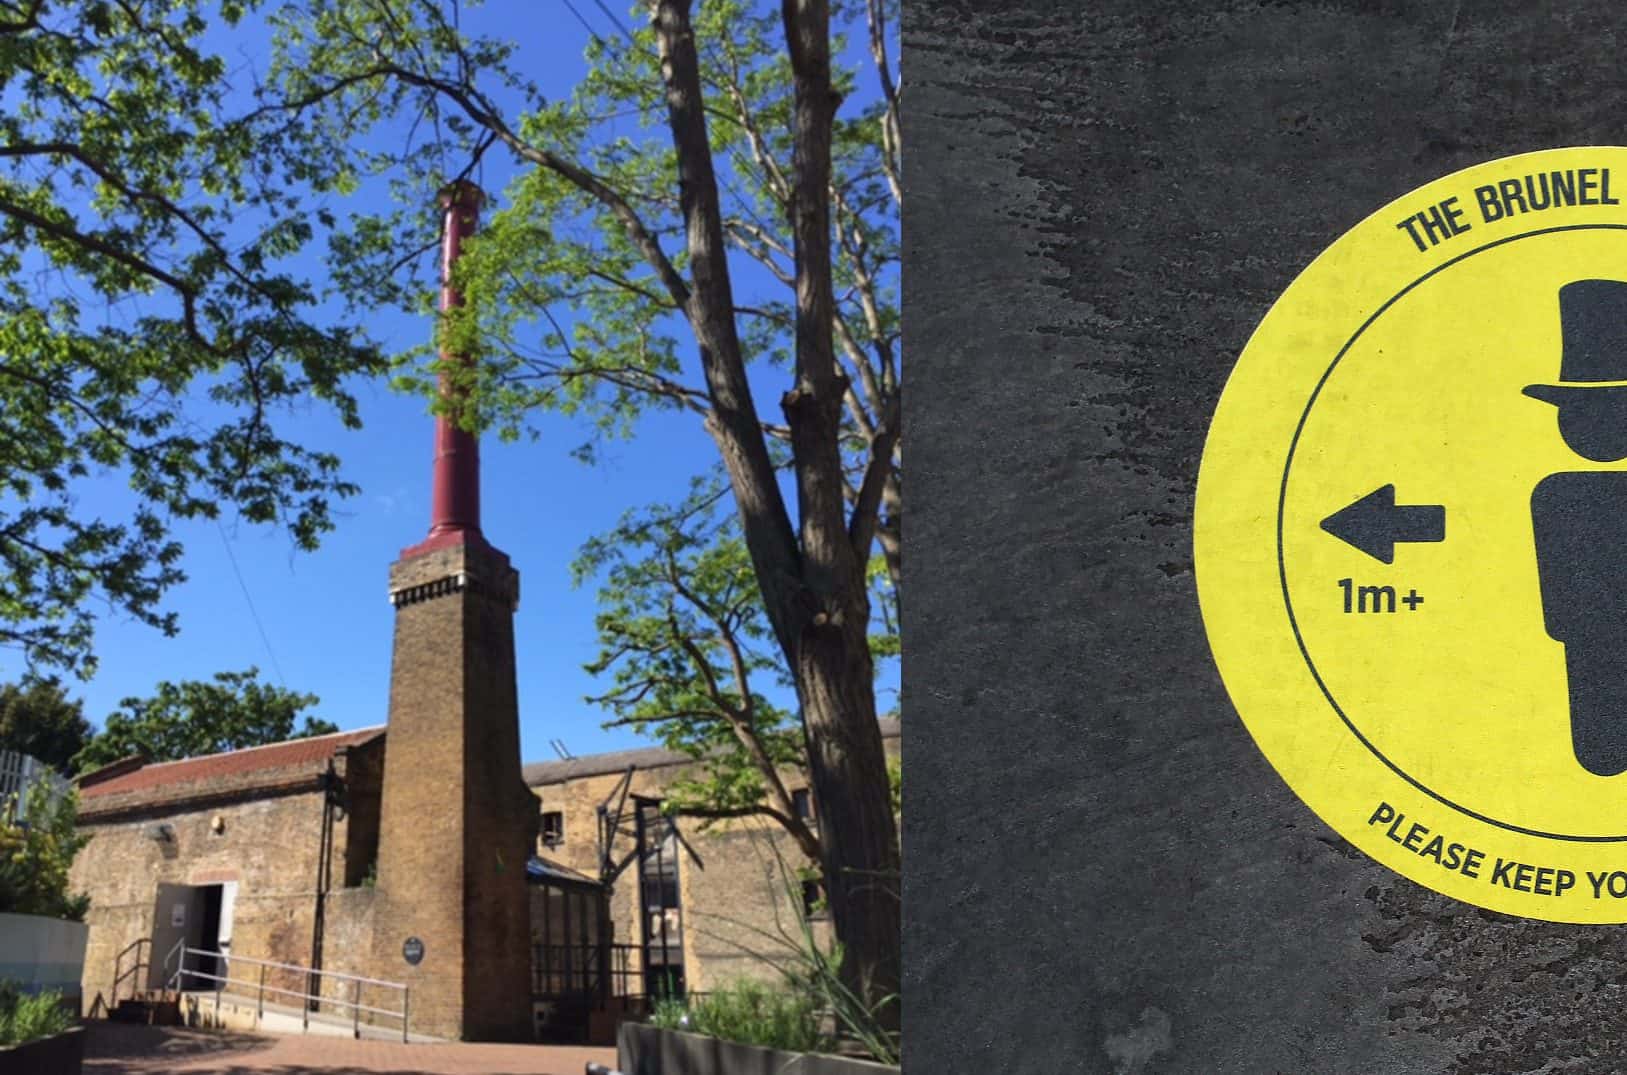 Left: The museum, right: a social distancing sticker the museum is using